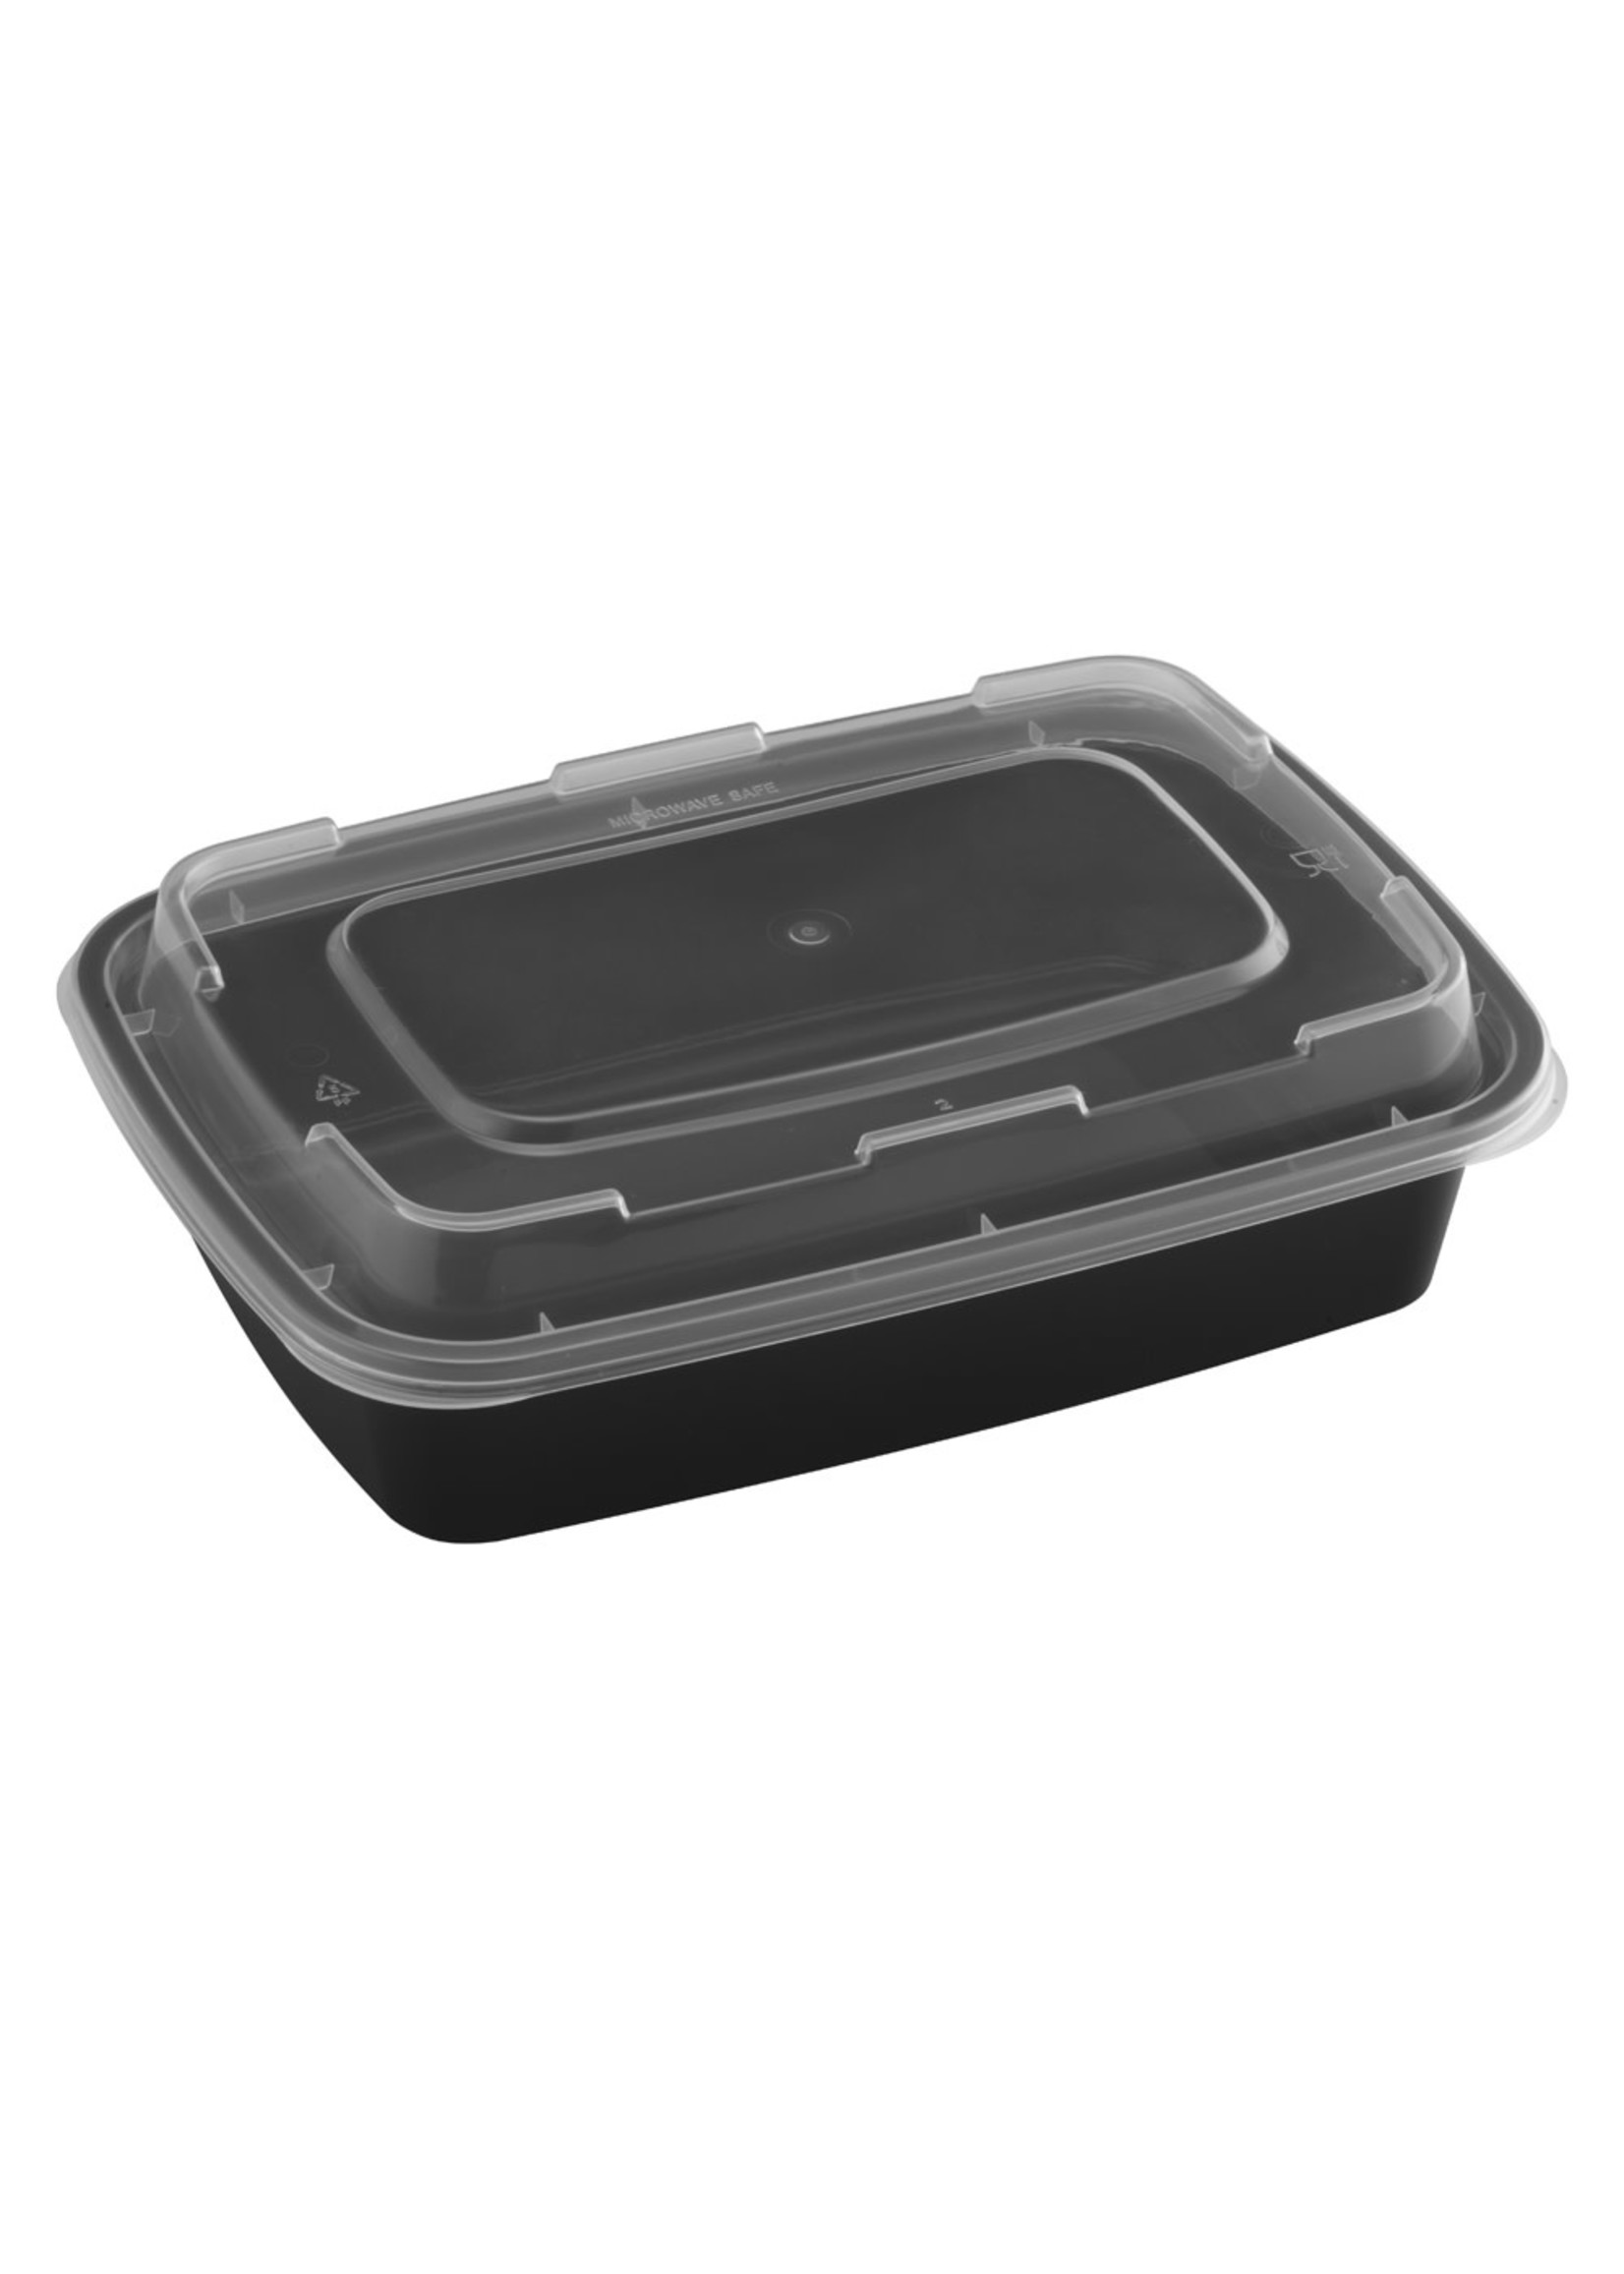 Gladway TY-24 / RC24 - 24oz Rectangular Microwaveable Container with Lid, 150 sets (50/6)